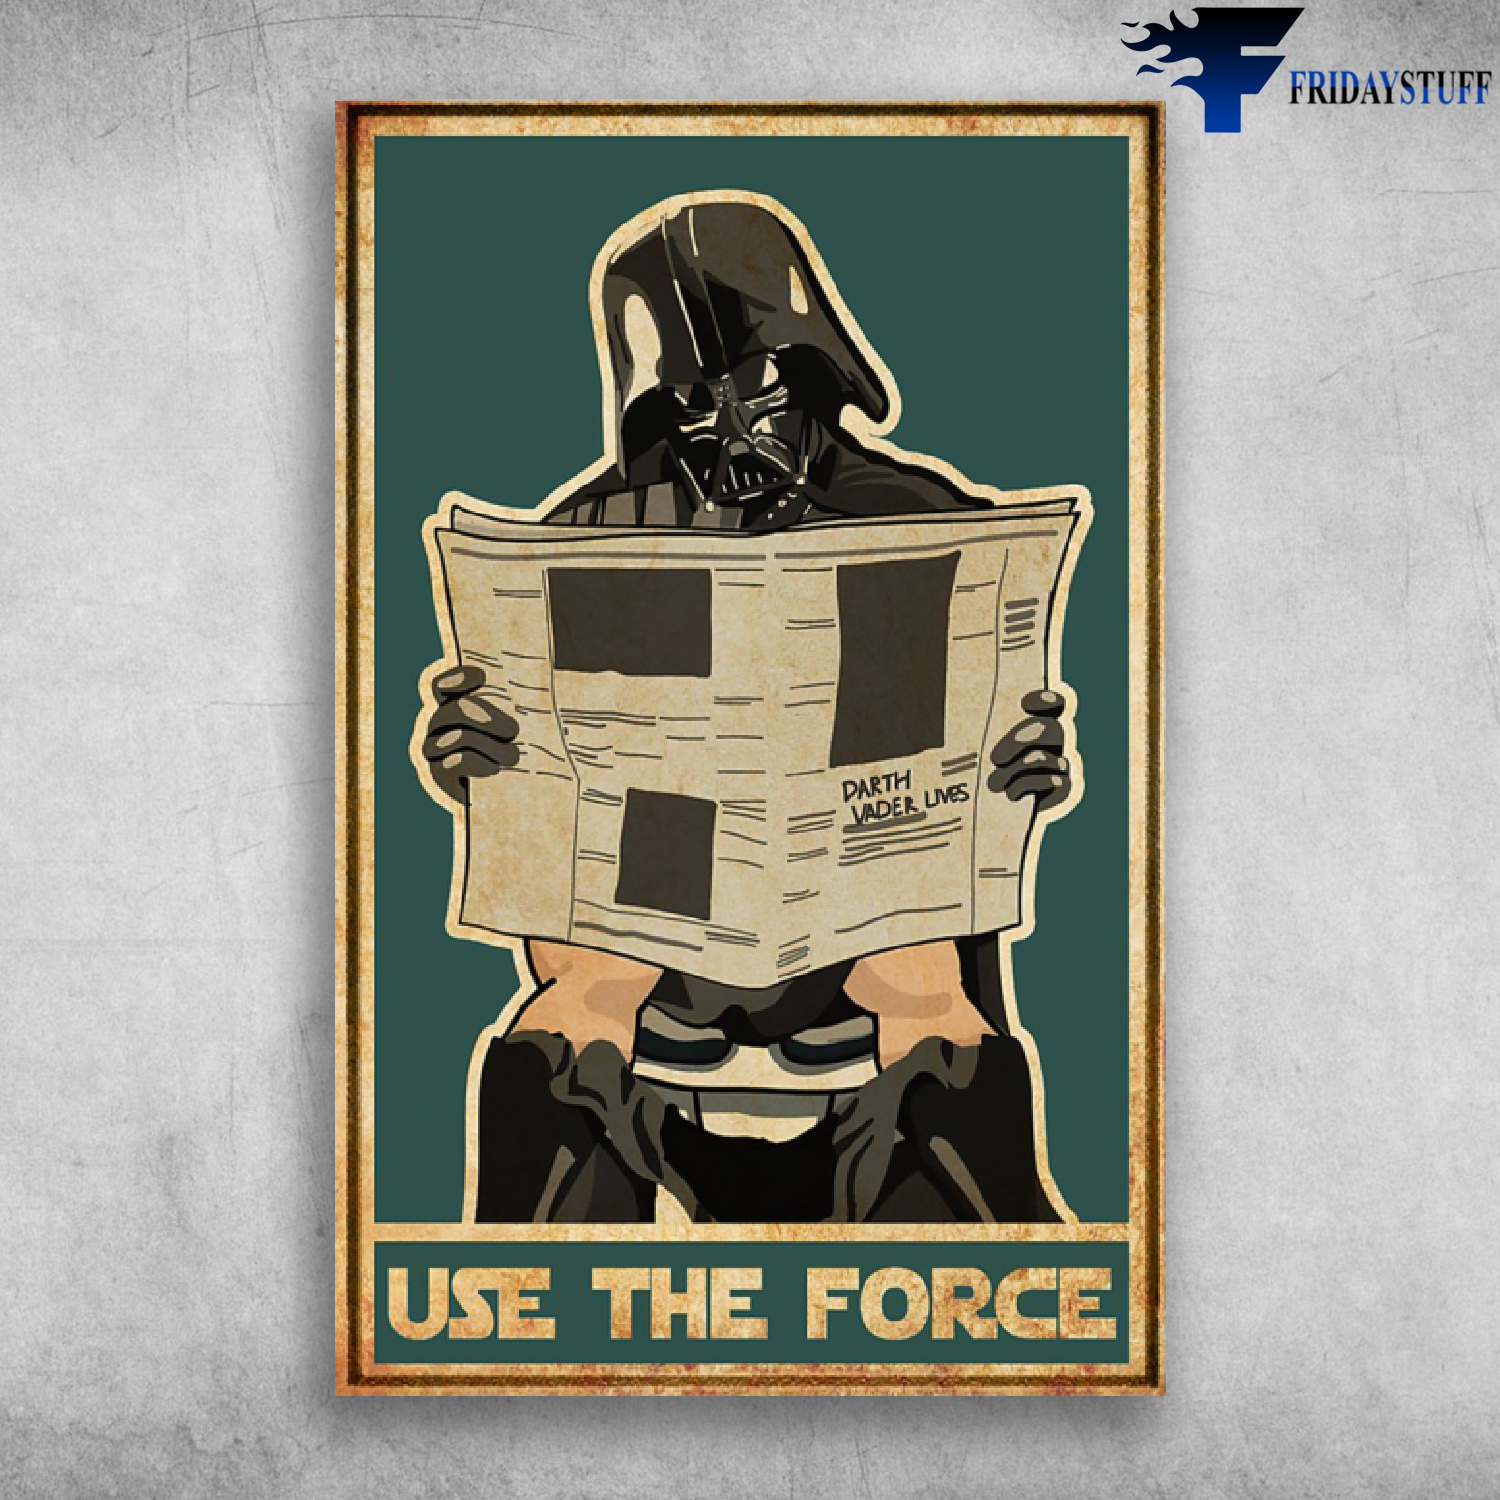 https://arthoodie.com/wp-content/uploads/2020/12/Use-The-Force-Star-Wars-Movies-Darth-Vader-is-Reading-Book-in-Toilet.jpg